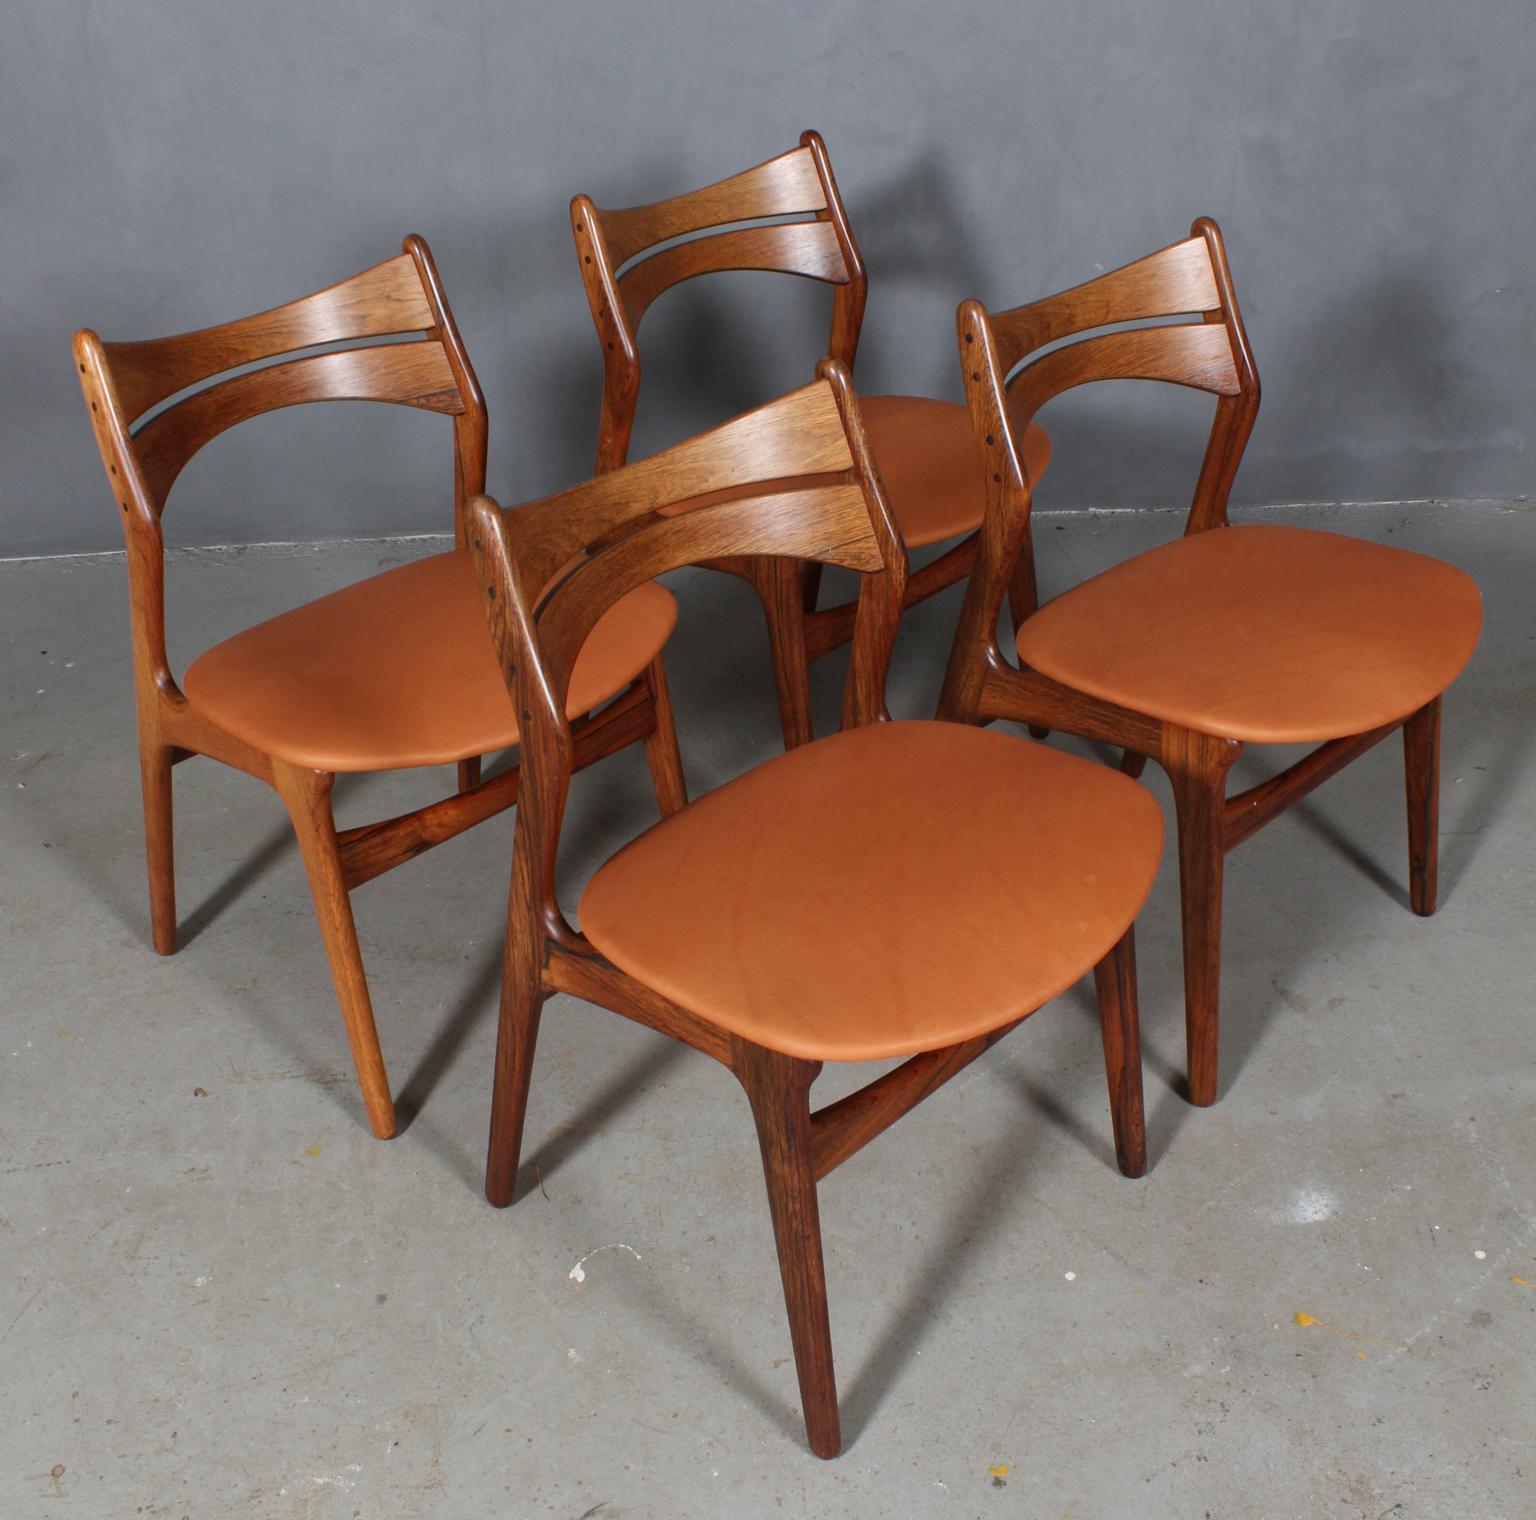 Four Eric Buch chairs with frame of partly solid rosewood.

New upholstered with tan aniline leather. 

Model 310, made by Chr Christensens Møbelfabrik, Denmark.